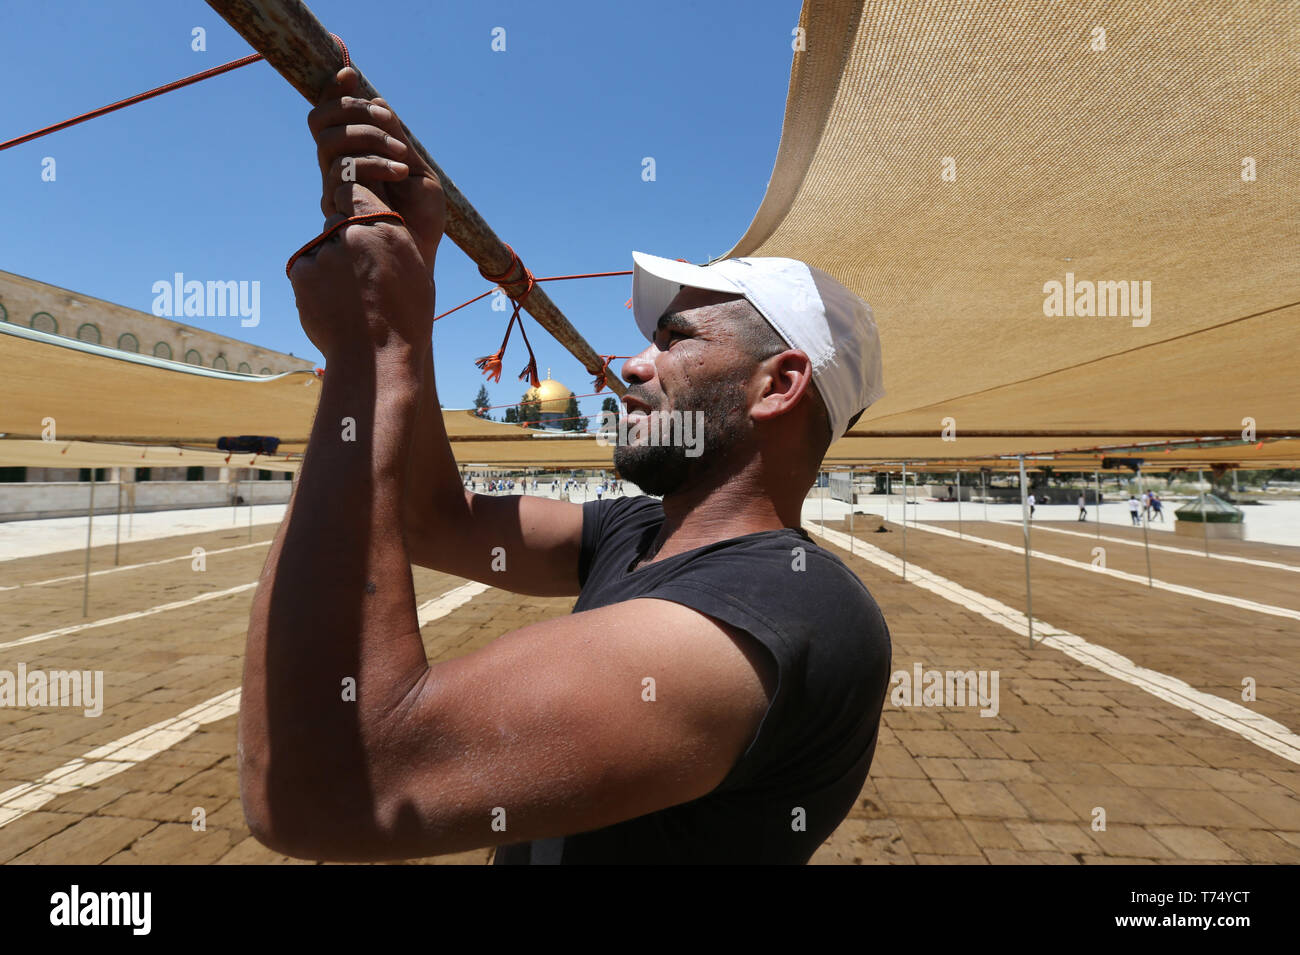 Jerusalem, Jerusalem's Old City. 4th May, 2019. A worker puts up canvases to provide shade for worshippers on the sacred compound known to Muslims as the Noble Sanctuary and to Jews as the Temple Mount, in preparation for the holy Muslim month of Ramadan, in Jerusalem's Old City, May 4, 2019. Credit: Muammar Awad/Xinhua/Alamy Live News Stock Photo